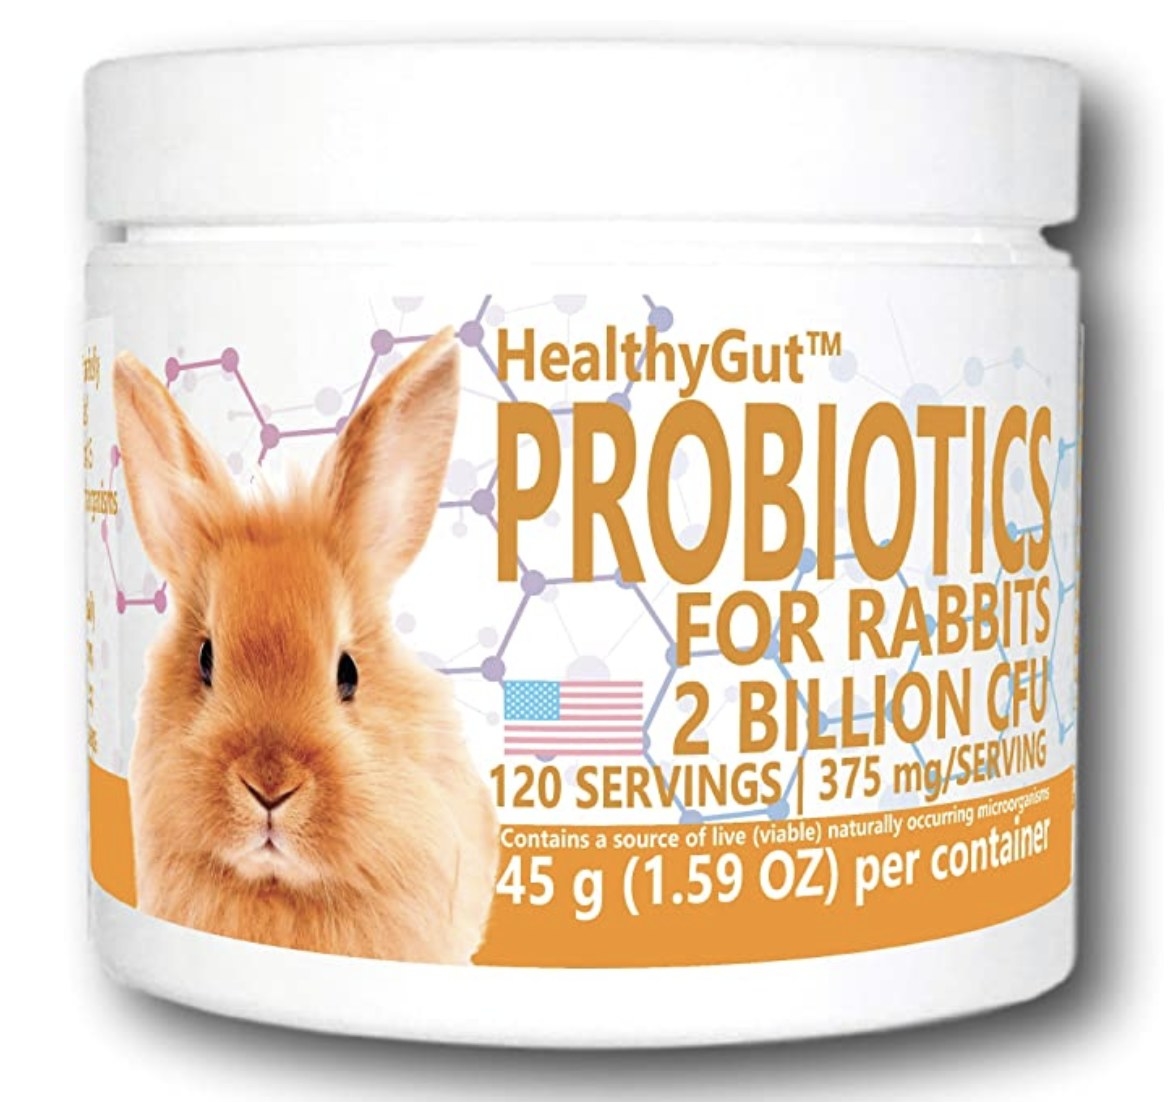 An image of a container of probiotic for rabbits